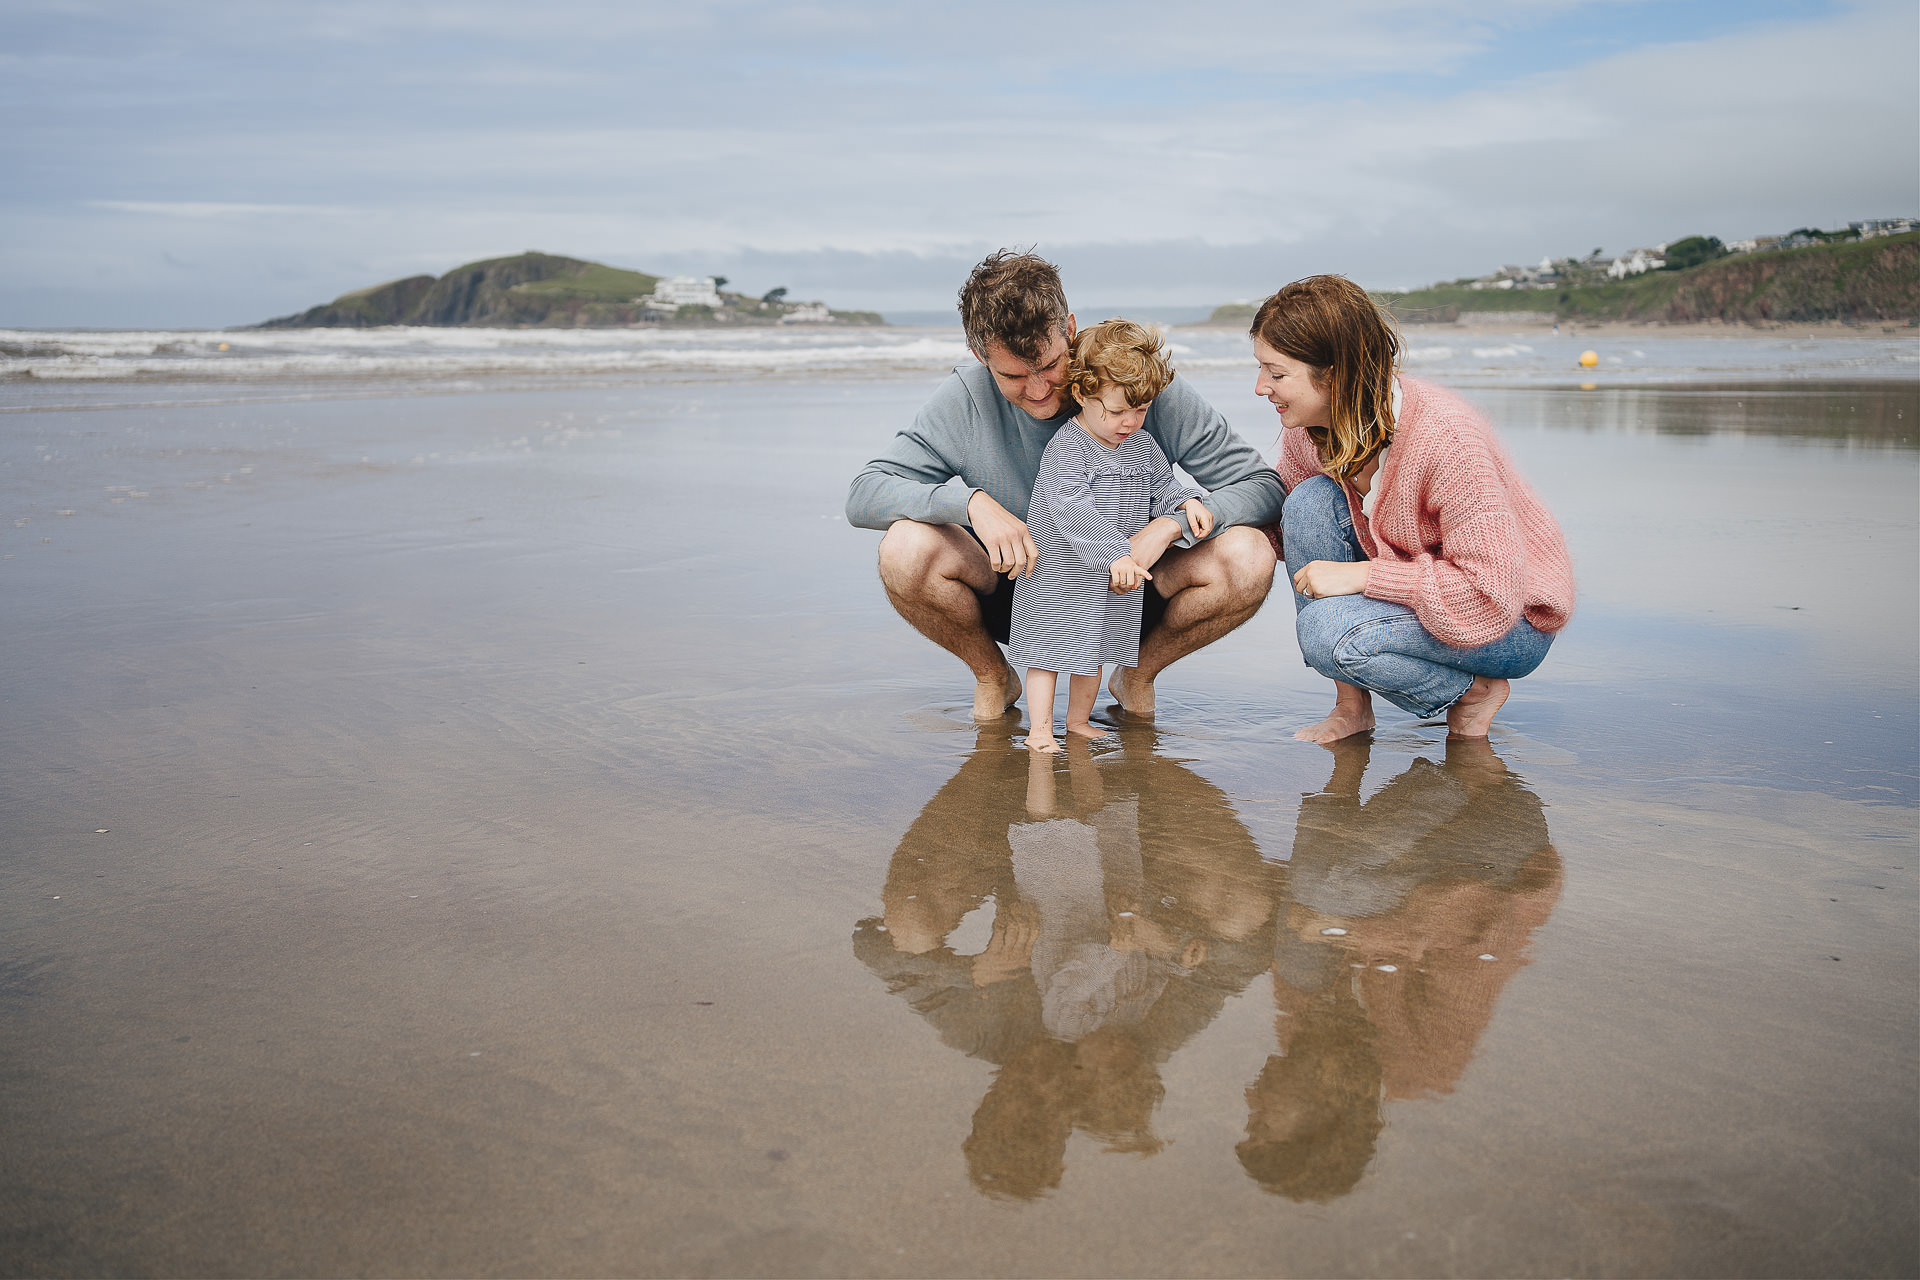 A family photography session on a beautiful Devon beach with two parents and a young child squatting in the sand